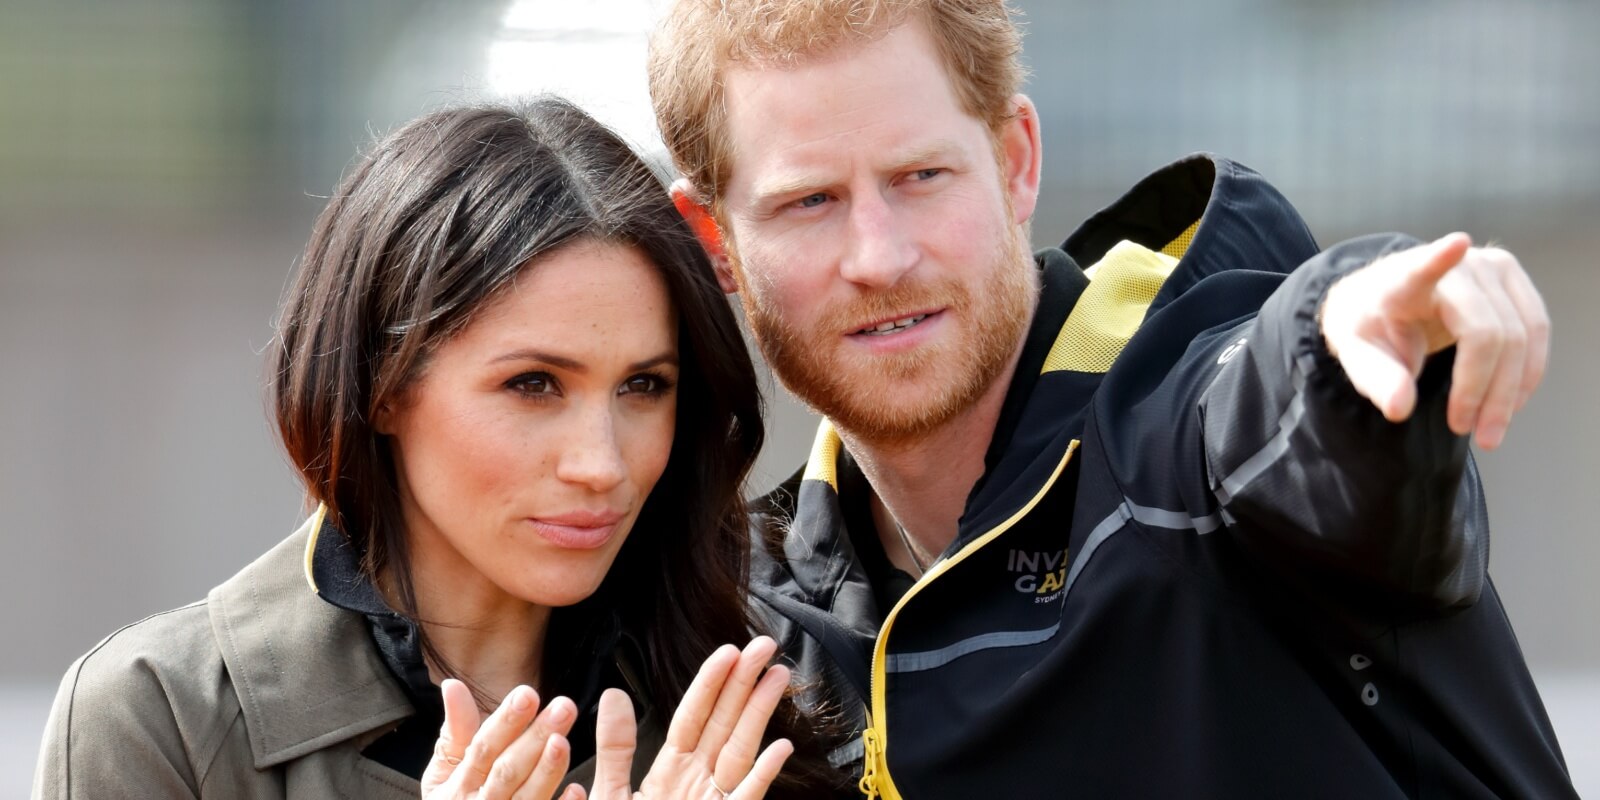 Meghan Markle and Prince Harry attend the UK Team Trials for the Invictus Games Sydney 2018 at the University of Bath on April 6, 2018 in Bath, England.